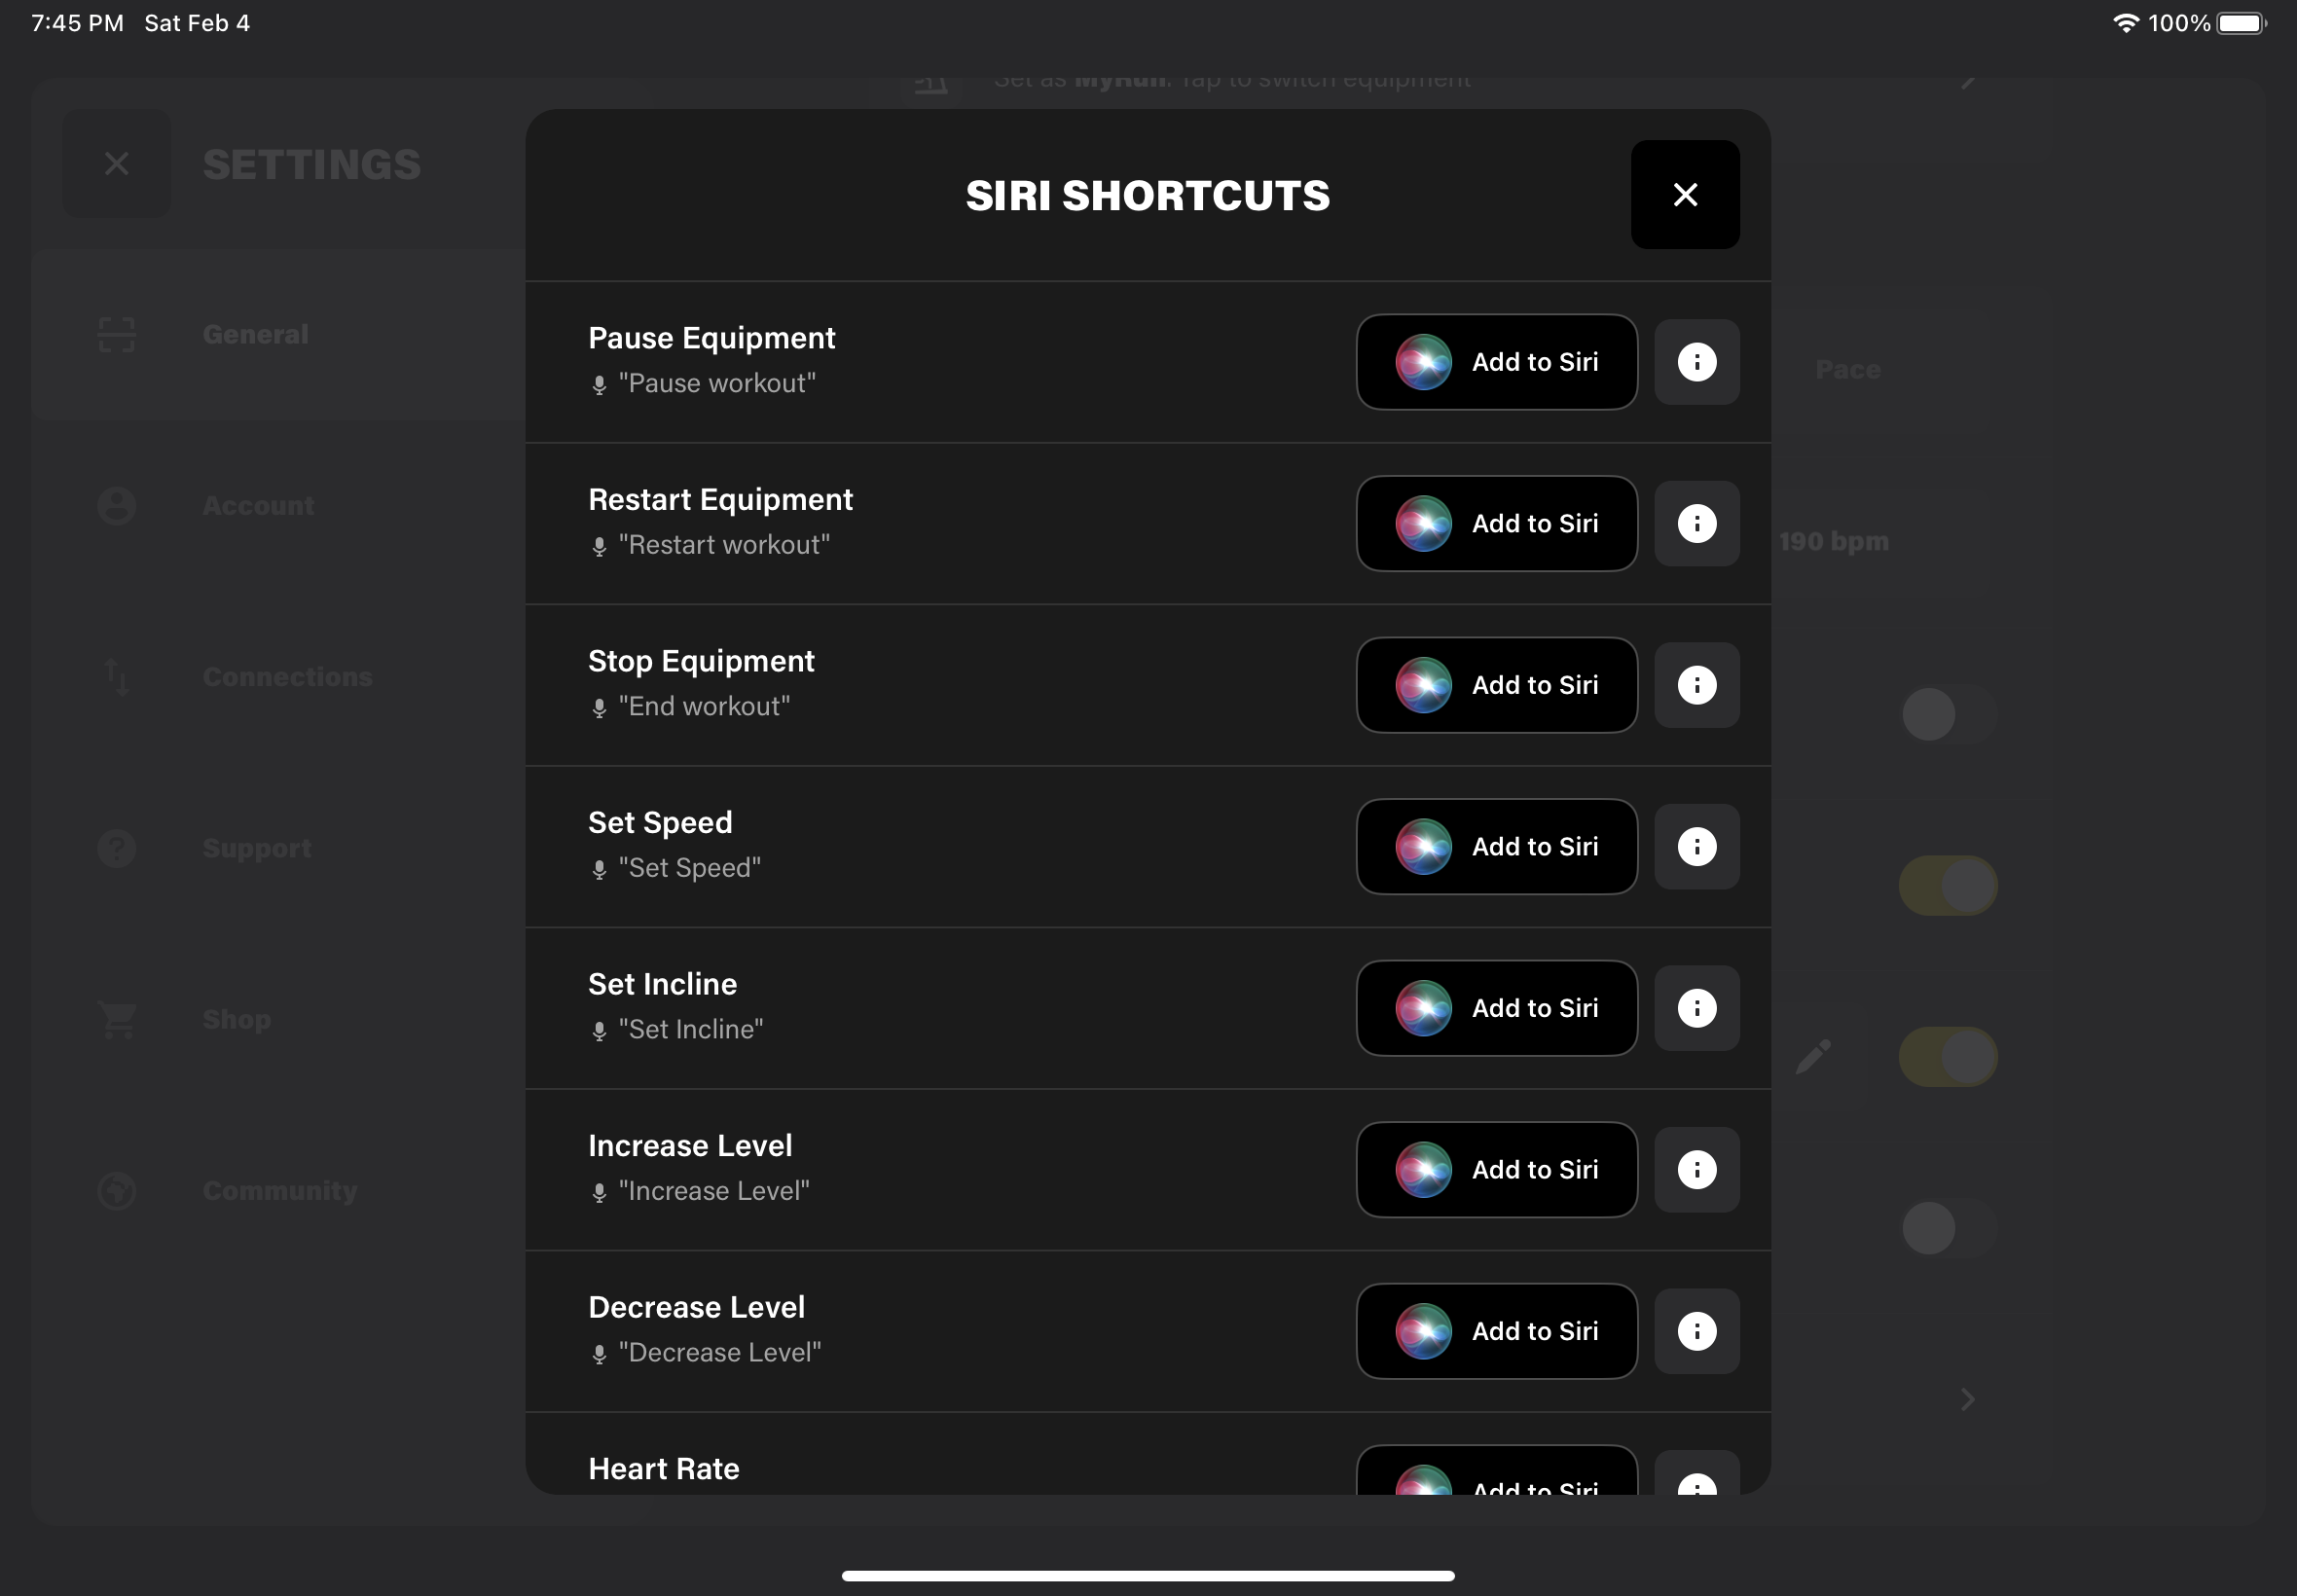 A screenshot of the various Siri shortcuts available in the Technogym Live app, including "pause equipment", "restart equipment", "stop equipment", "set speed", "set incline", "increase level", "decrease level", and "heart rate".